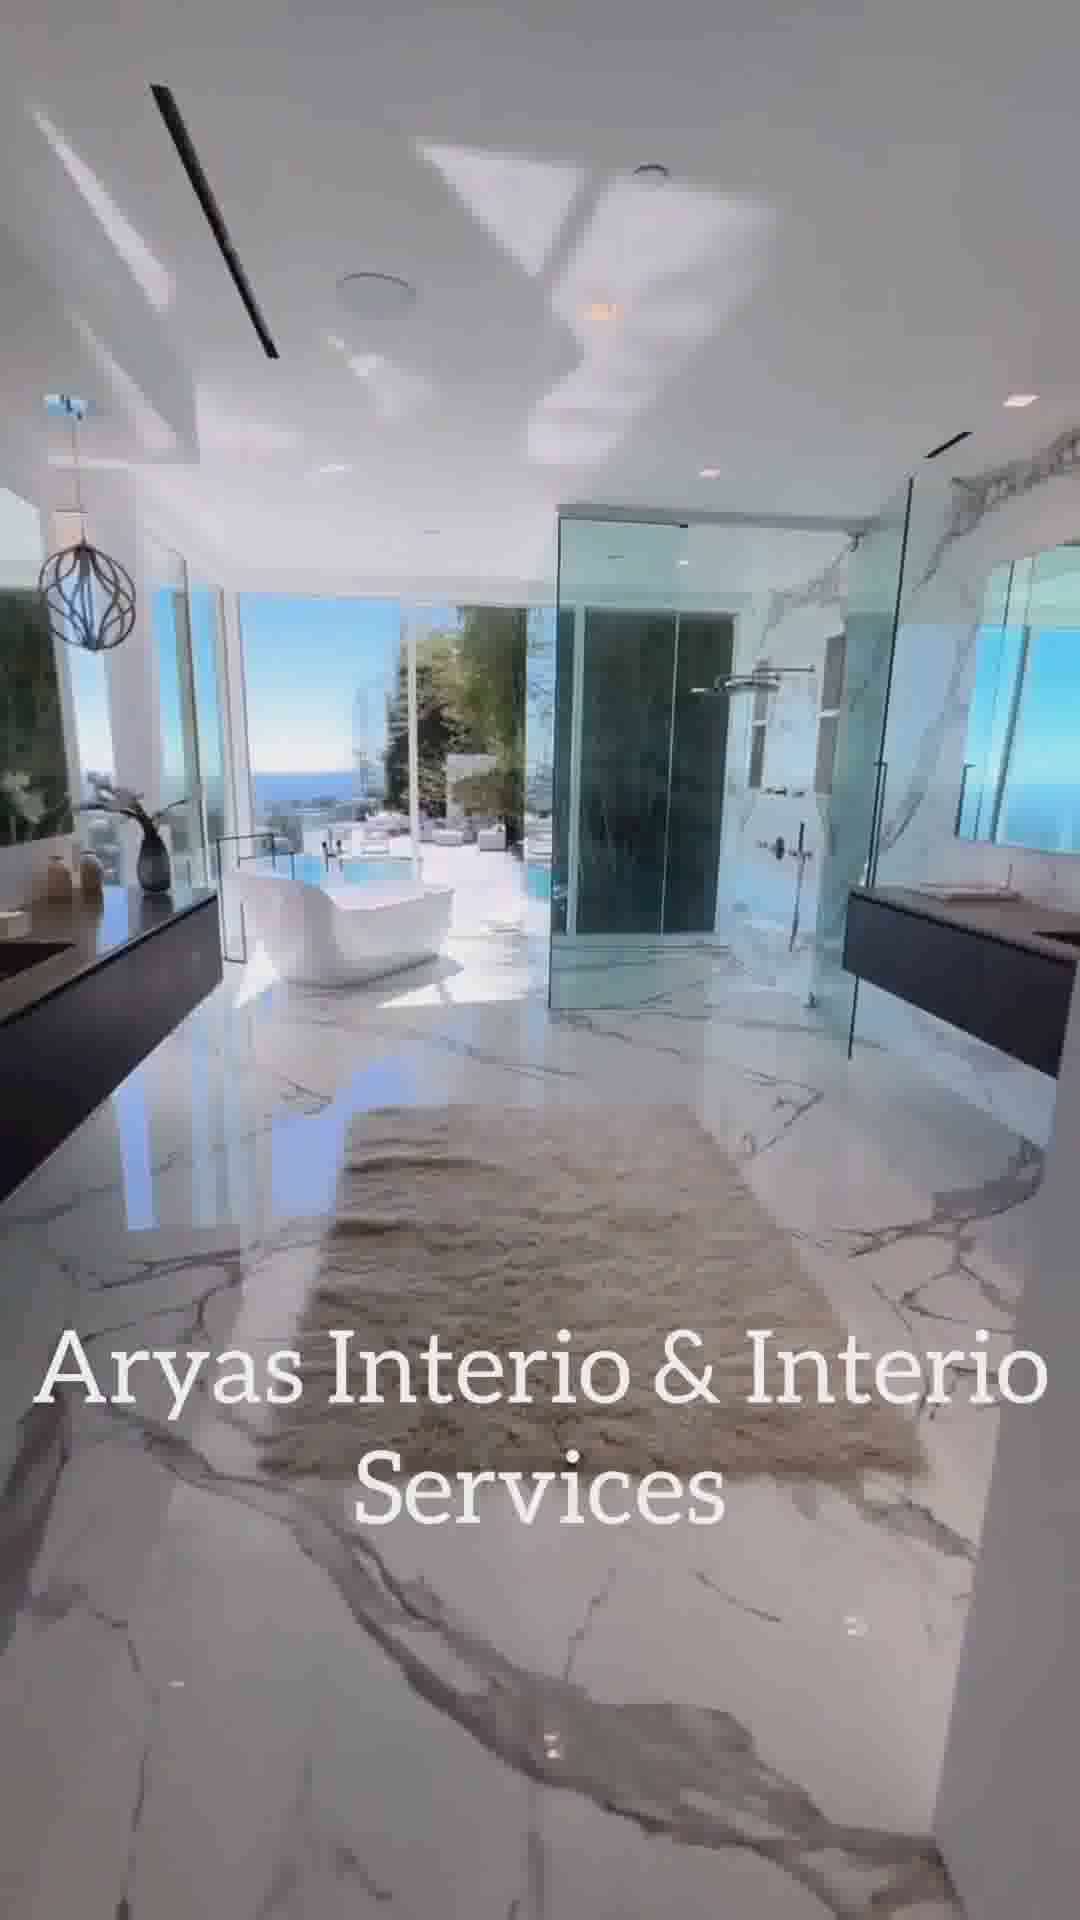 Aryas interio & infra Services wishes you all a very Happy new year 2023.
exciting offers this new year, luxury flat interiors services by Design Interios a unit of 
Aryas Interio & Infra Services
Provide complete end to end Professional Construction & interior Services in Delhi Ncr, Gurugram, Ghaziabad, Noida, Greater Noida, Faridabad, chandigarh, Manali and Shimla. Contact us right now for any interior or renovation work, call us @ +91-7018188569 &
Visit our website at www.designinterios.com
Follow us on Instagram #aryasinterio and Facebook @aryasinterio .
#uttarpradesh #construction_himachal
#noidainterior #noida #delhincr #delhi #Delhihome  #noidaconstruction #interiordesign #interior #interiors #interiordesigner #interiordecor #interiorstyling #delhiinteriors #greaternoida #faridabad #ghaziabadinterior #ghaziabad  #chandigarh